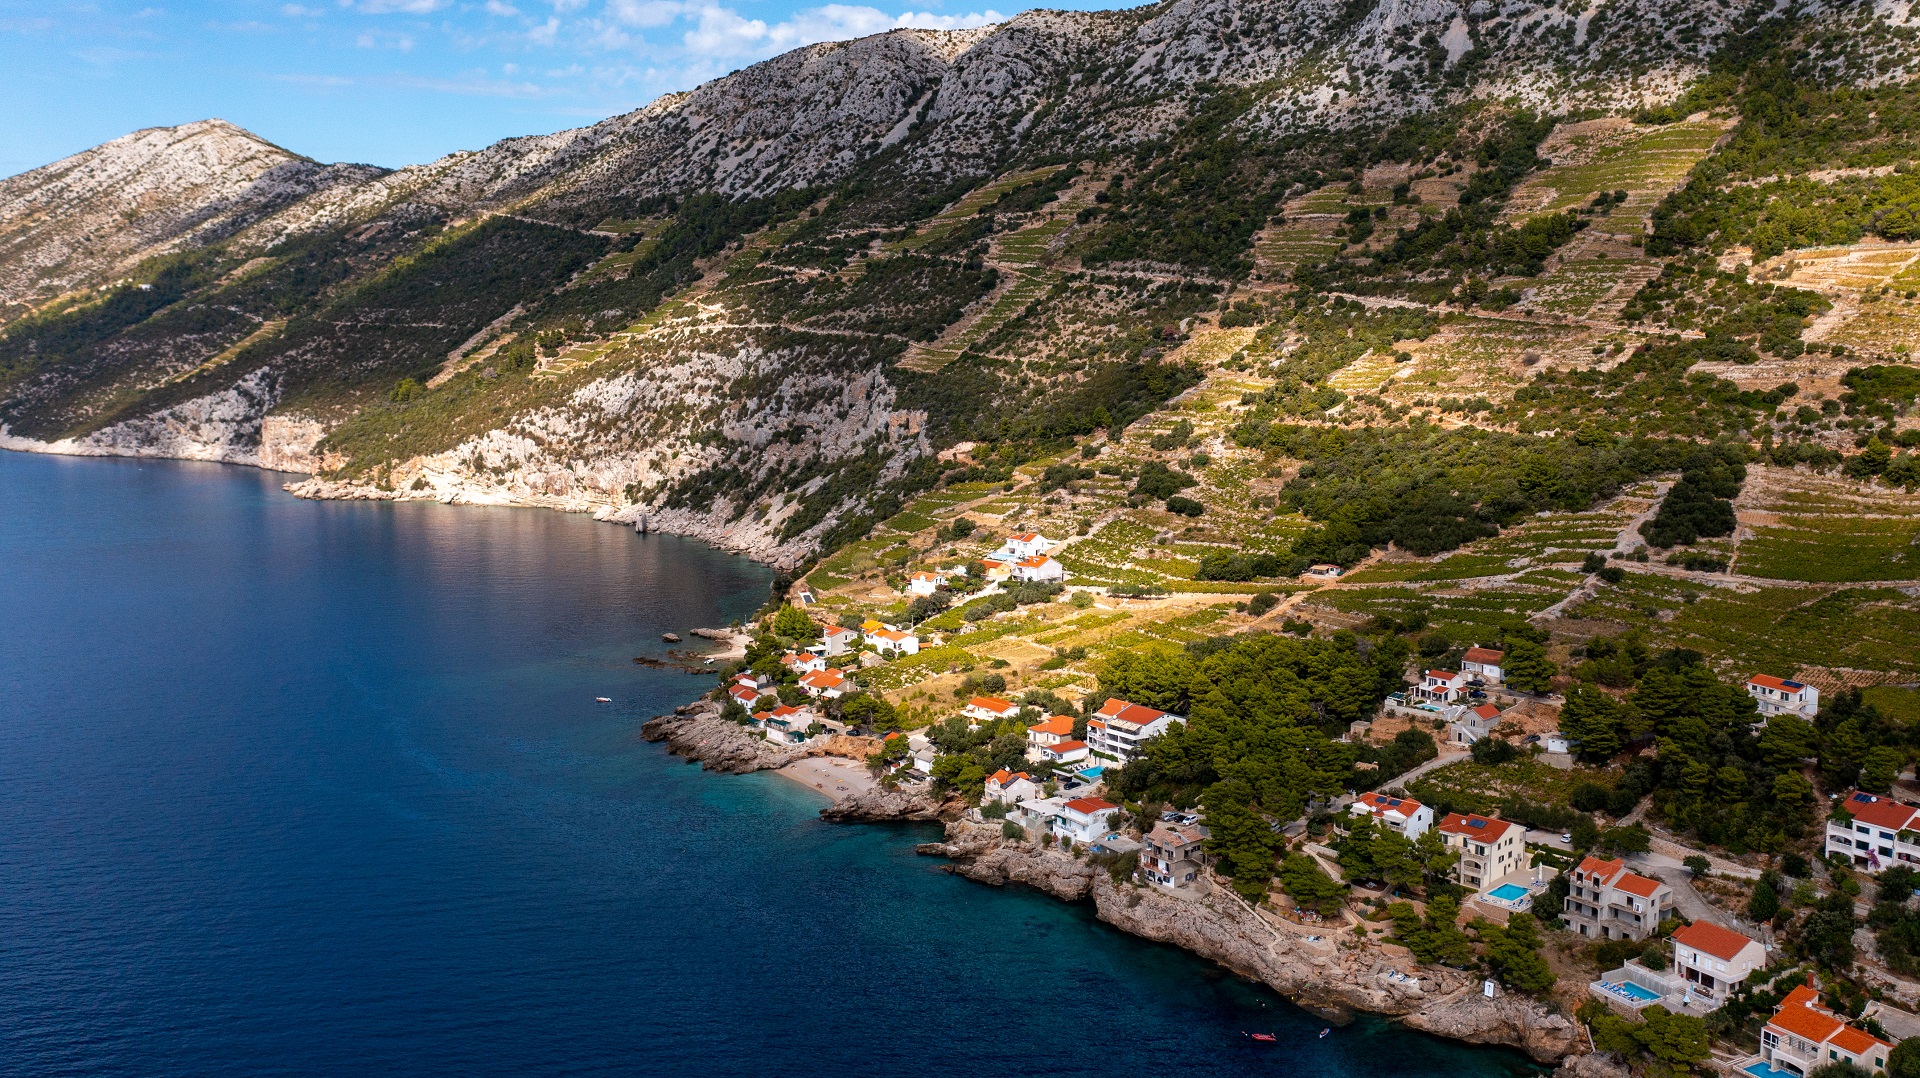 Pelješac: More than beautiful beaches and pristine sea - here is what else to check out